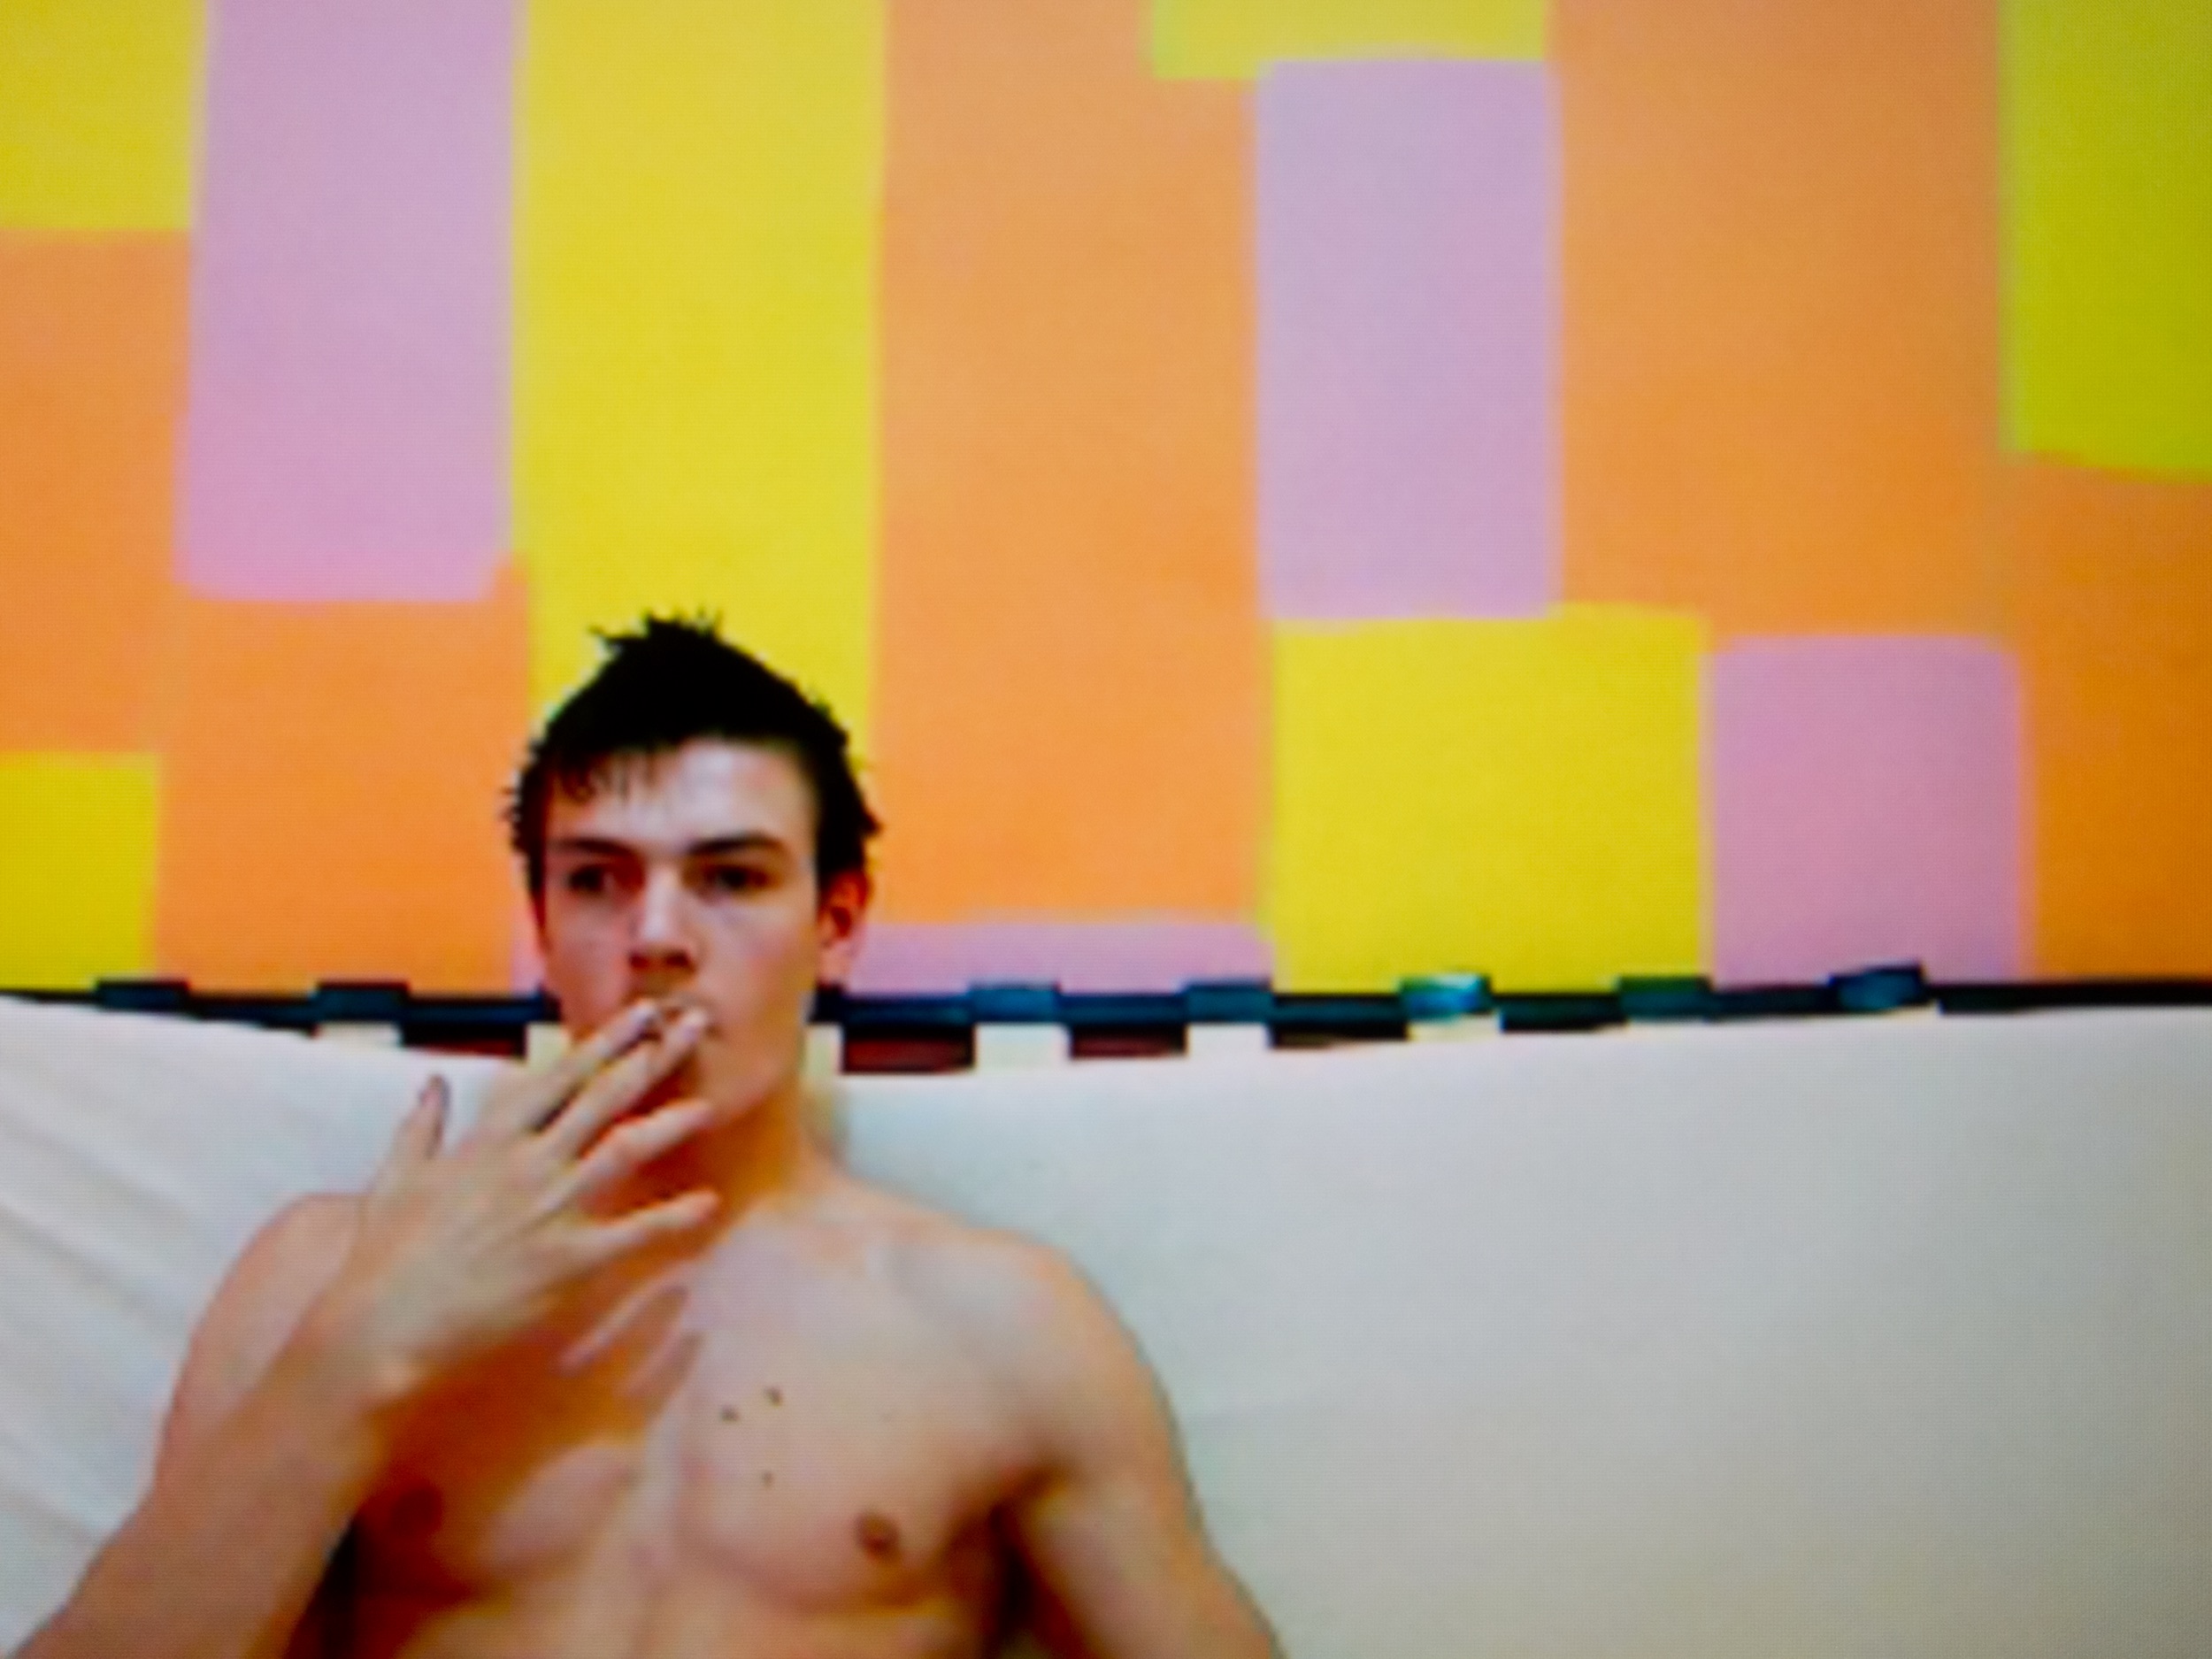 A bare-chested male stripper takes a drag on a cigarette while sitting on a white sofa in front of a wall painted with yellow, orange, and lavender rectangular shapes